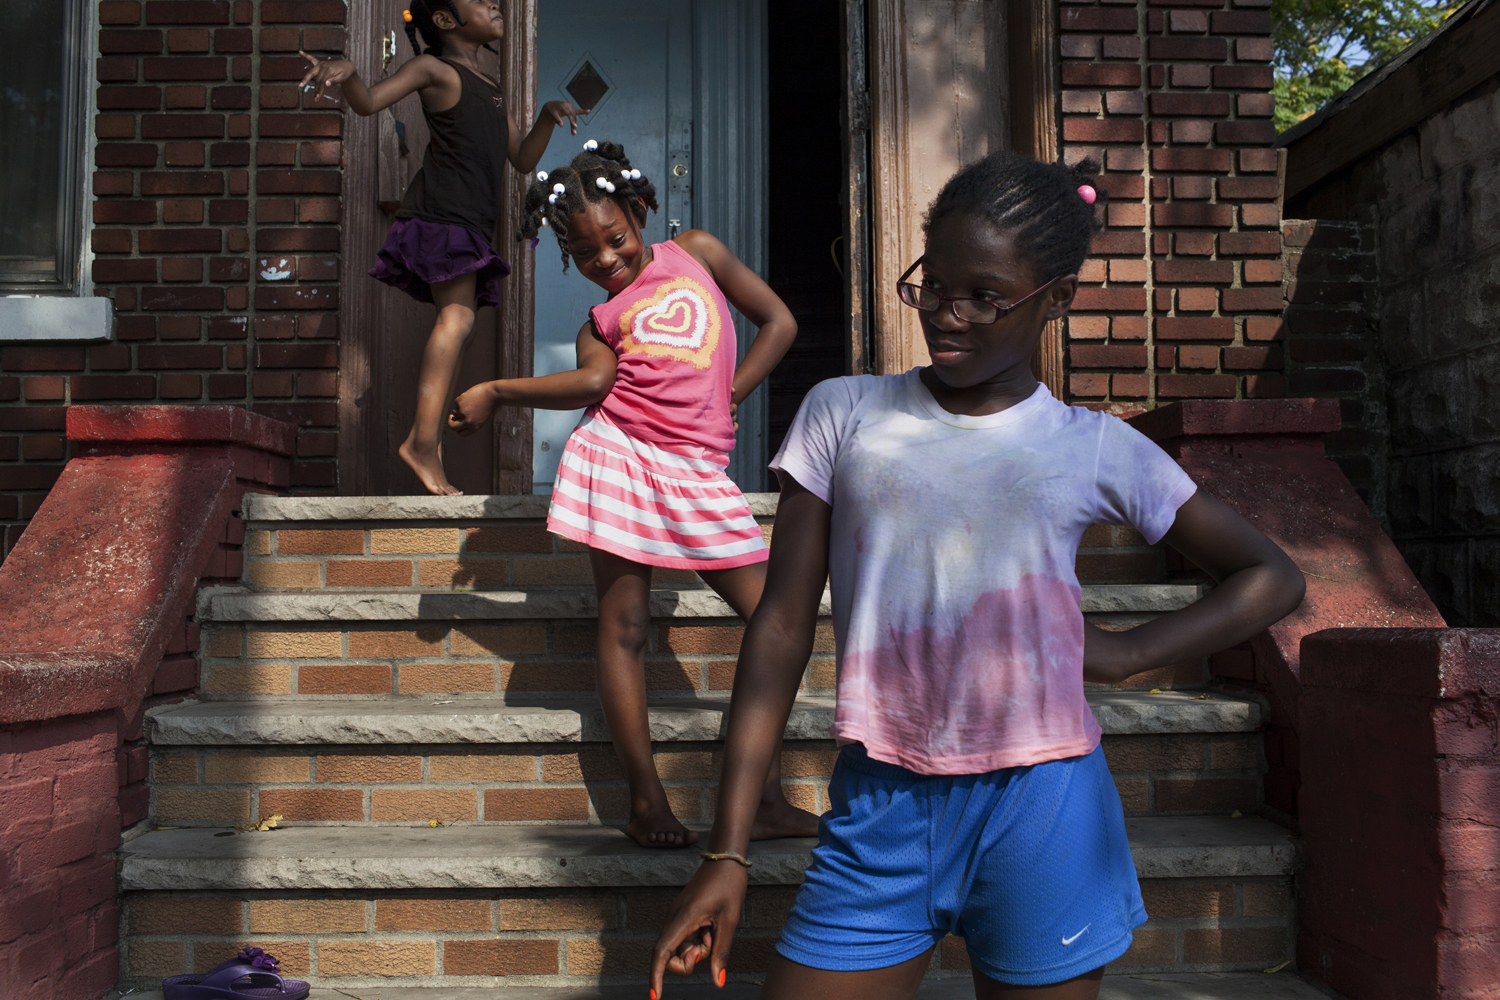 August 21, 2013. Flatbush, Brooklyn. Sarah's niece and her friends strike poses on the stoop of Sarah's home on a summer afternoon. Dancehall dancers often site their dance abilities as part of their Caribbean heritage. Young girls start to learn some of the less suggestive dance moves in a dance hall queen's repertoire very young, but Sarah's niece giggle and exclaims "We're too young!" when asked if she can dance like her auntie. Two months later, Sarah will be shot in the foot just a few feet from this stoop.(Natalie Keyssar)